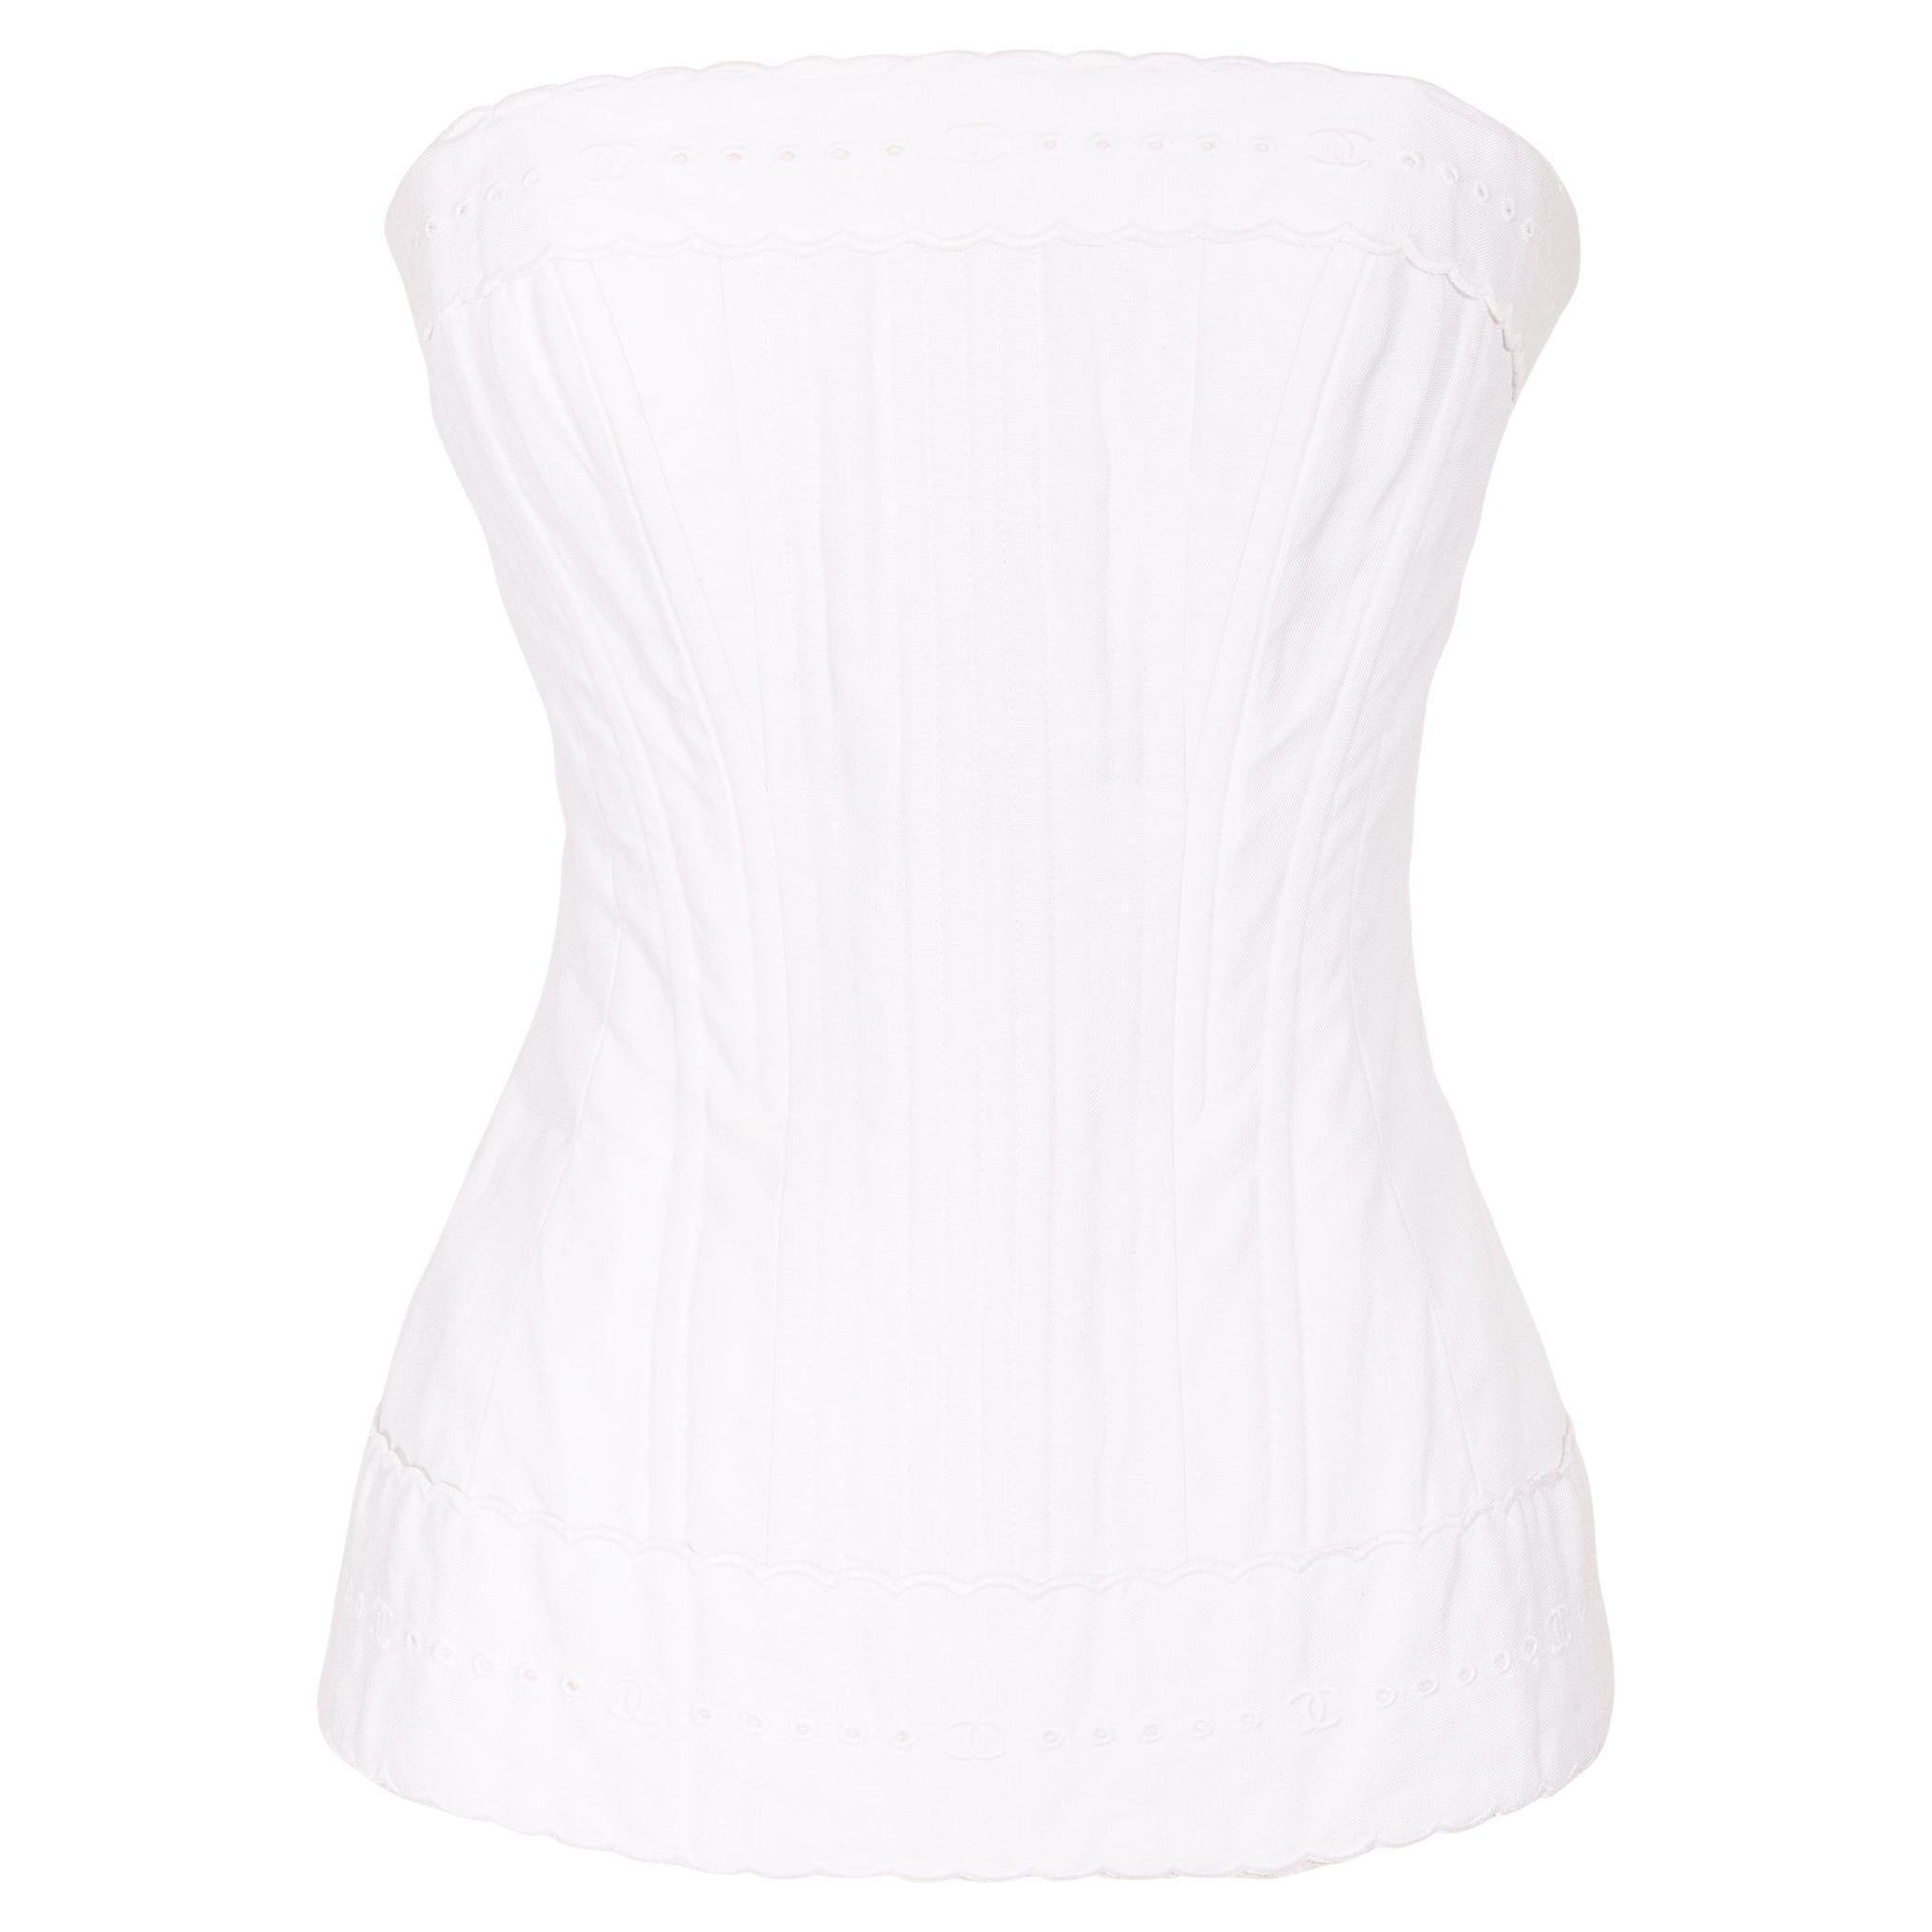 S/S 1993 Chanel by Karl Lagerfeld White Strapless Corset